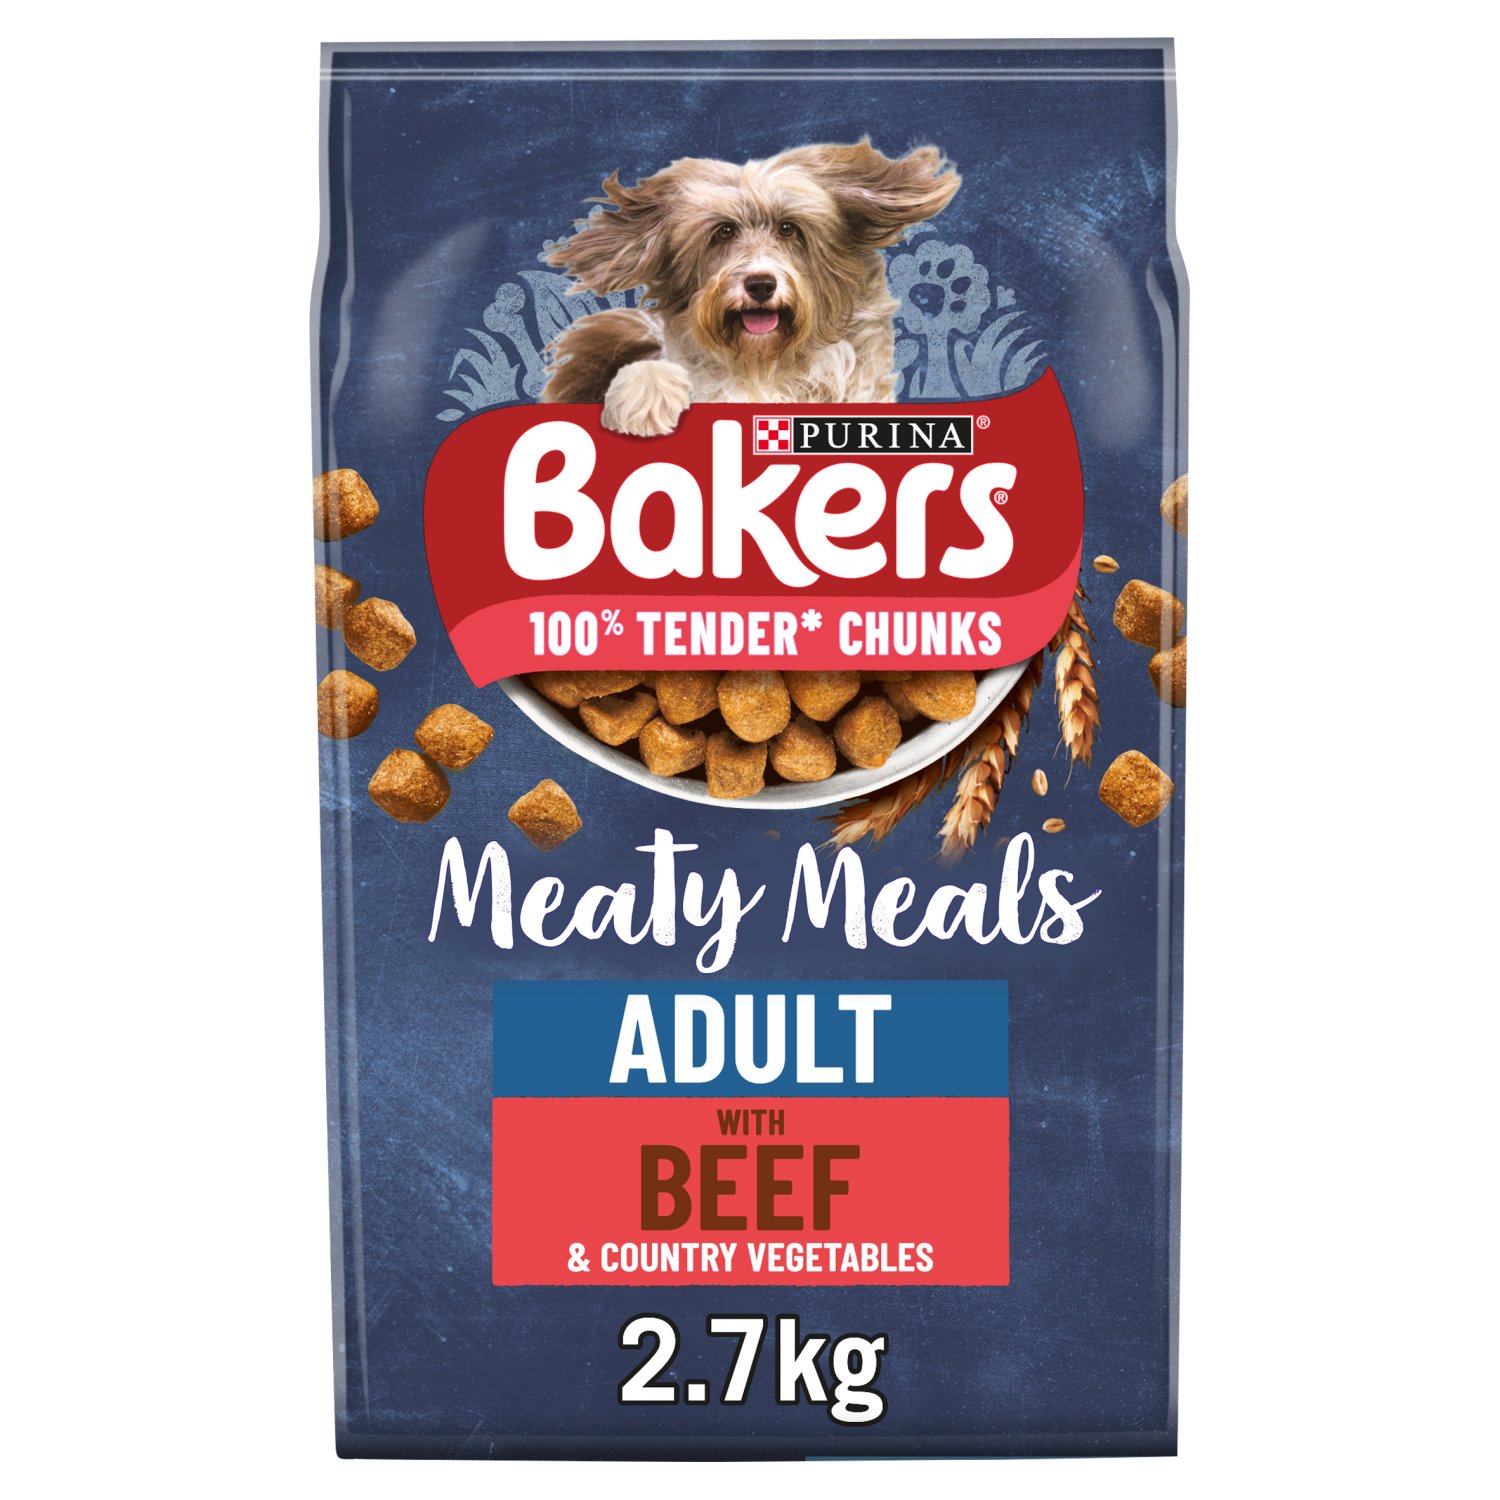 Bakers Meaty Meals Beef Dry Dog Food (2.7 kg)